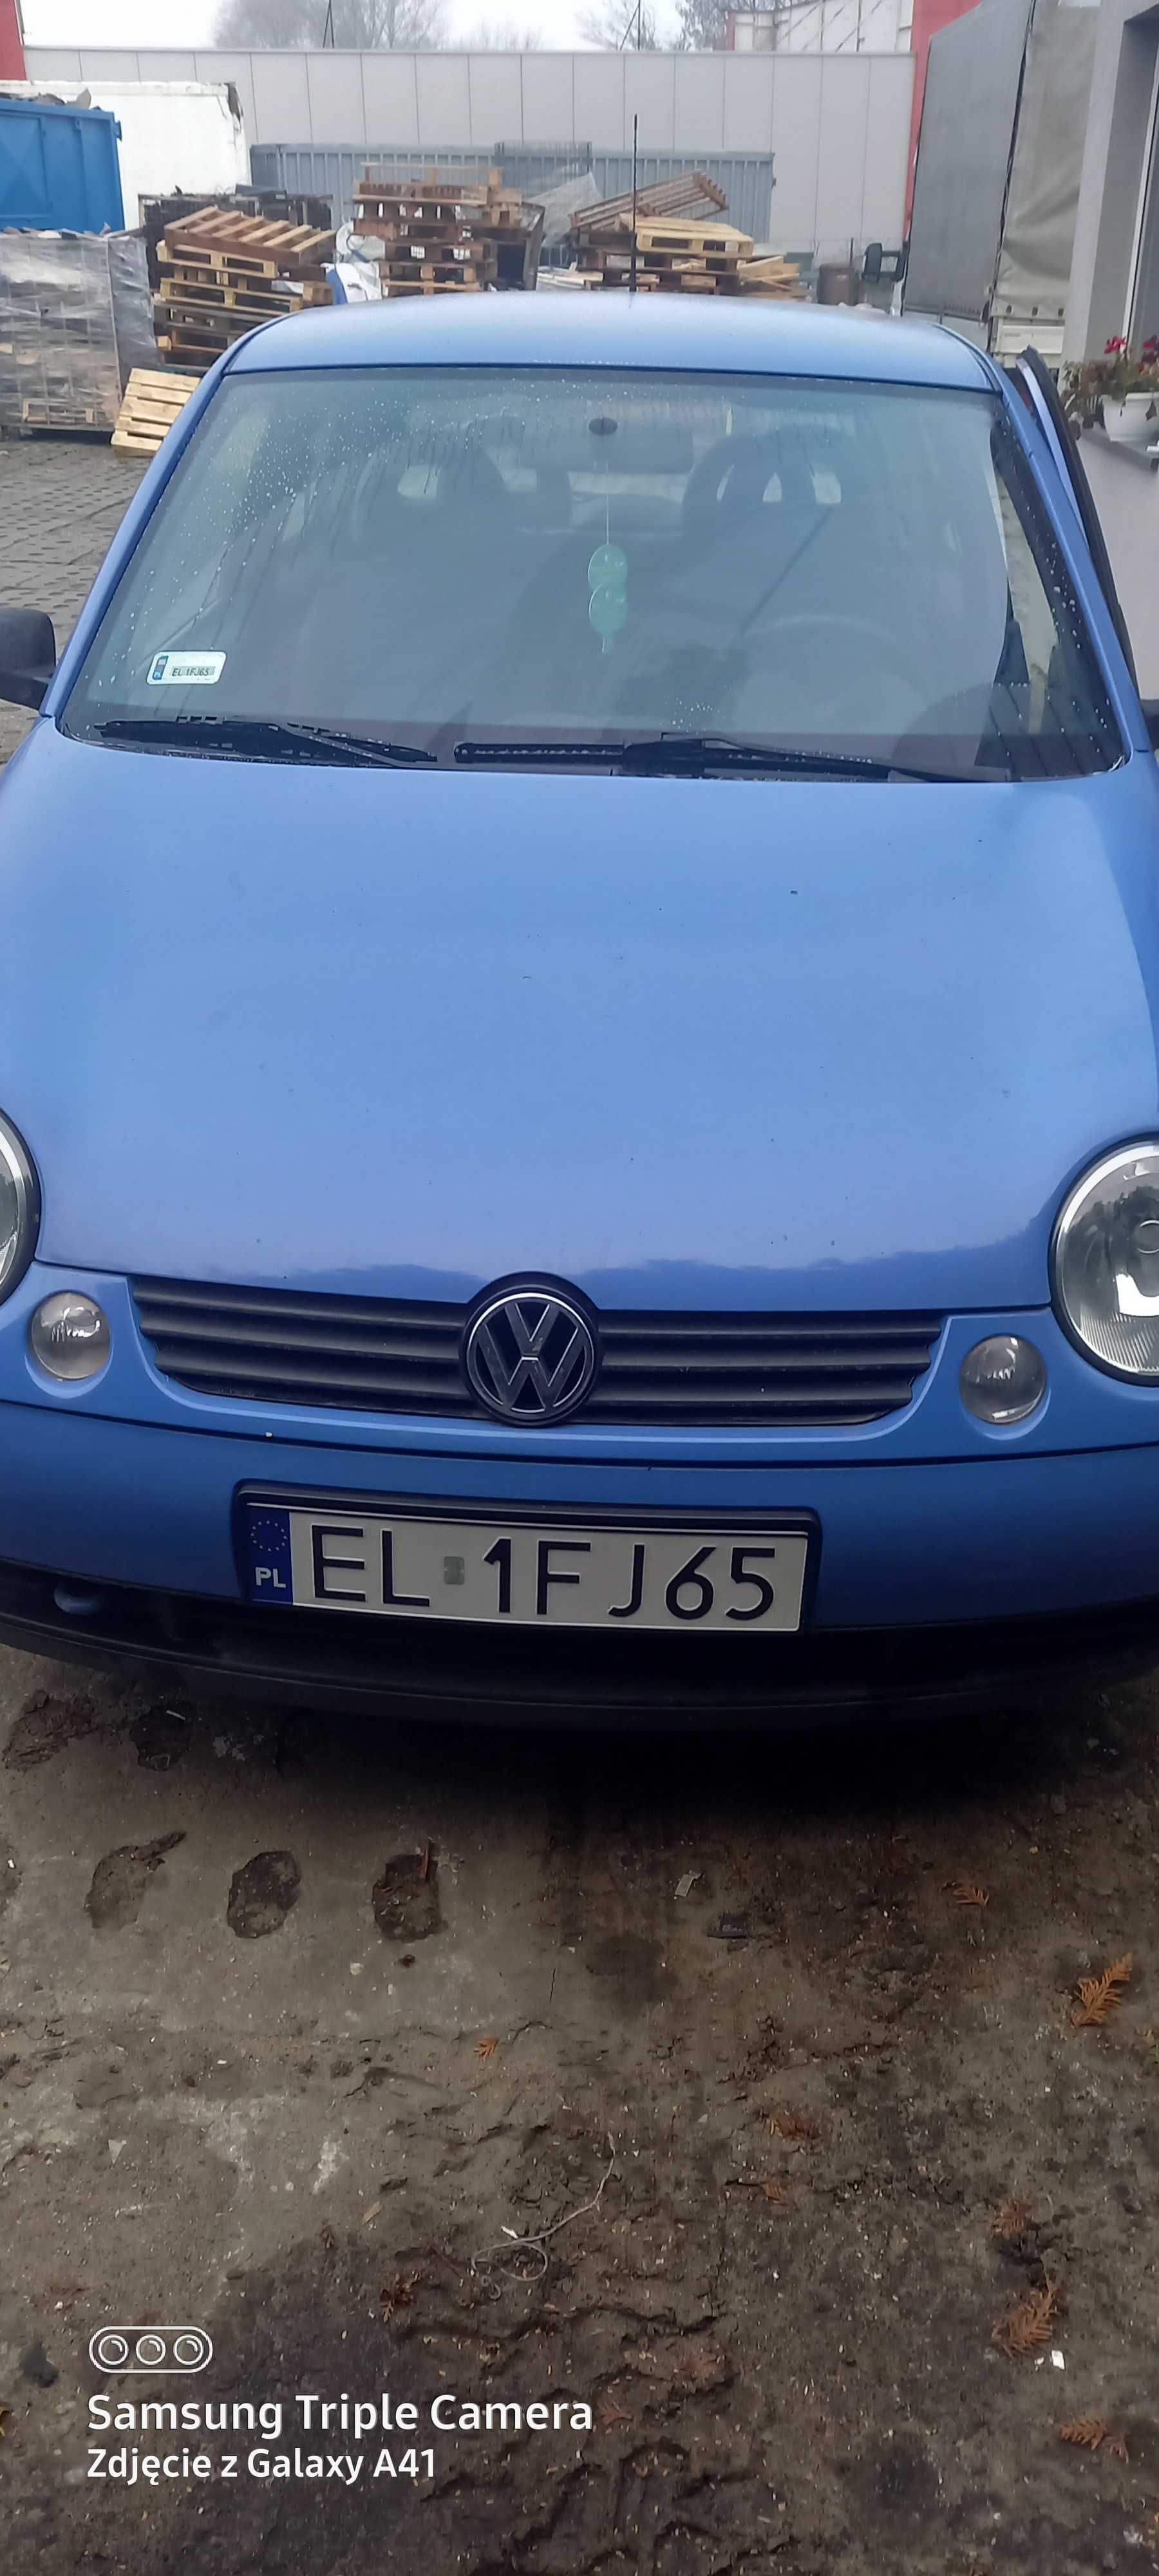 Volkswagen LUPO 1.0 benzyna